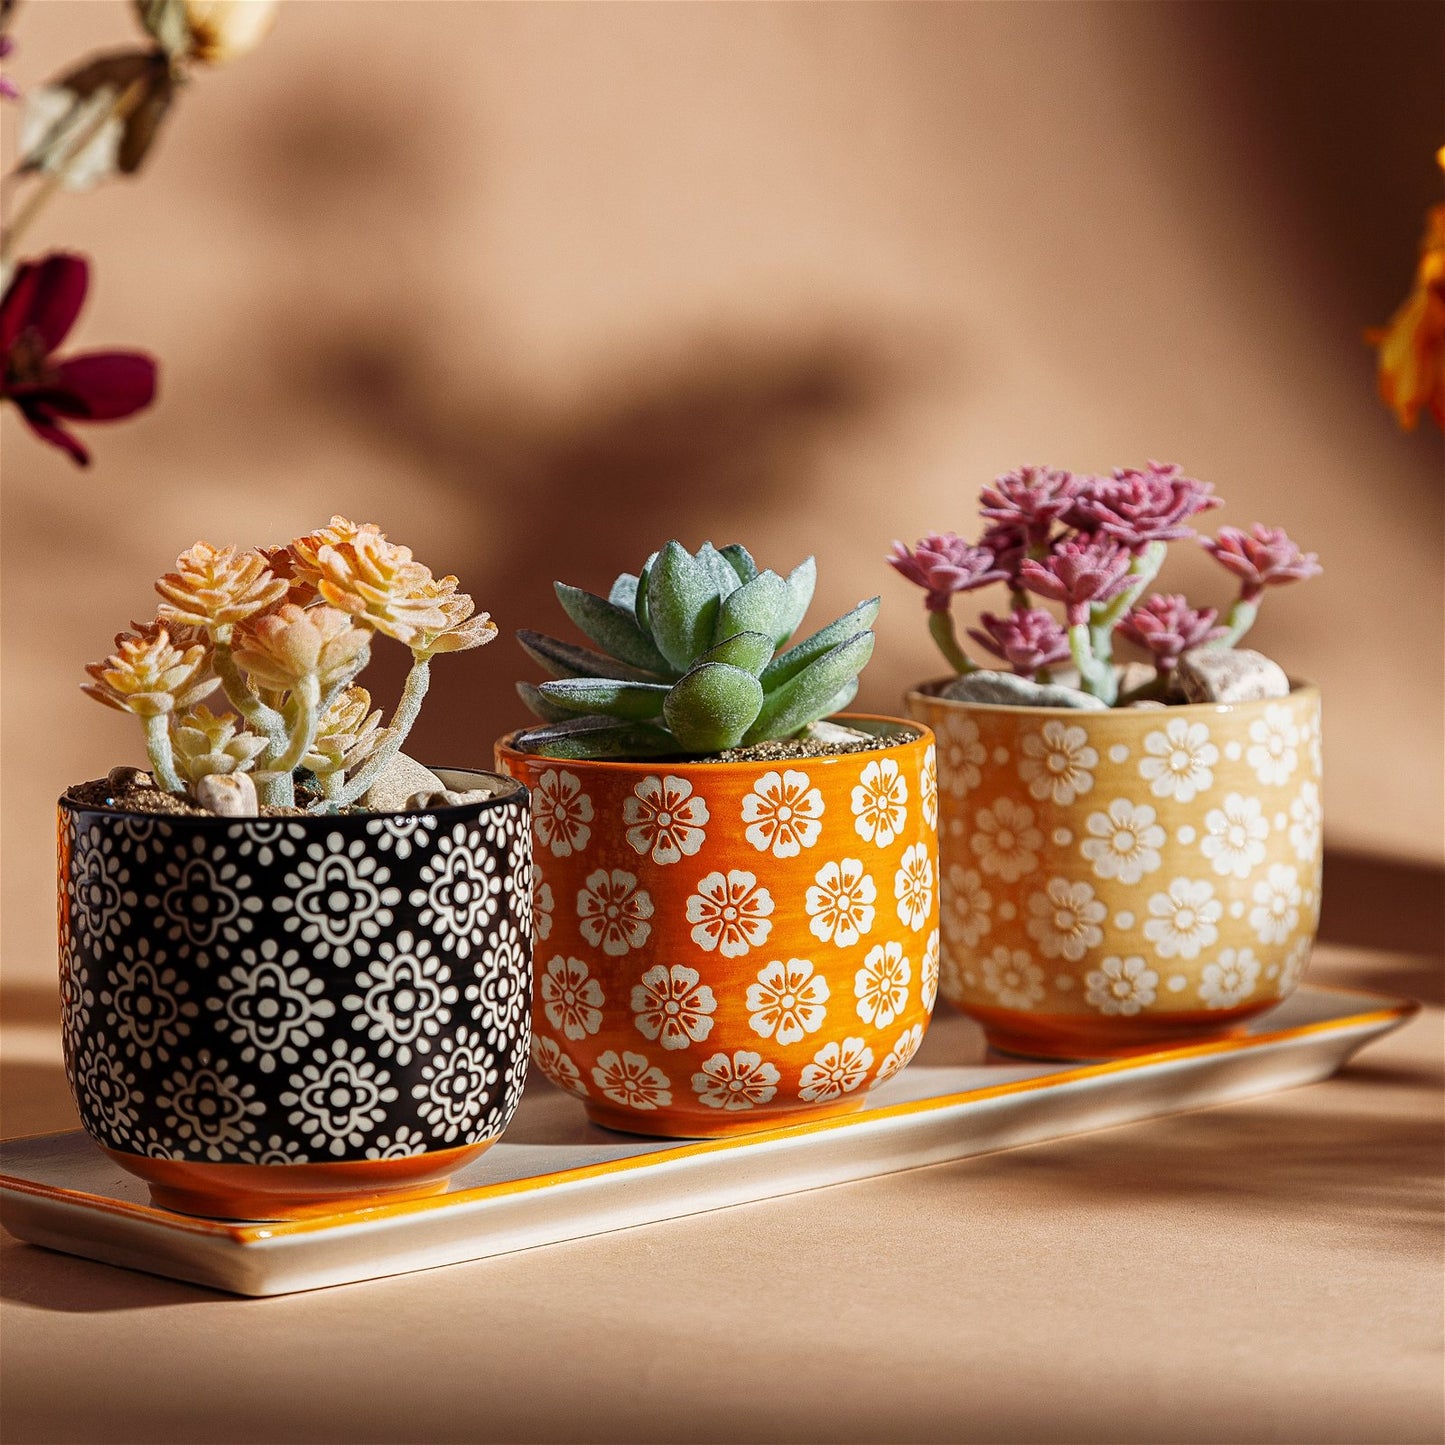 Global Craft Mini Planters - Set of 3 - a Cheeky Plant